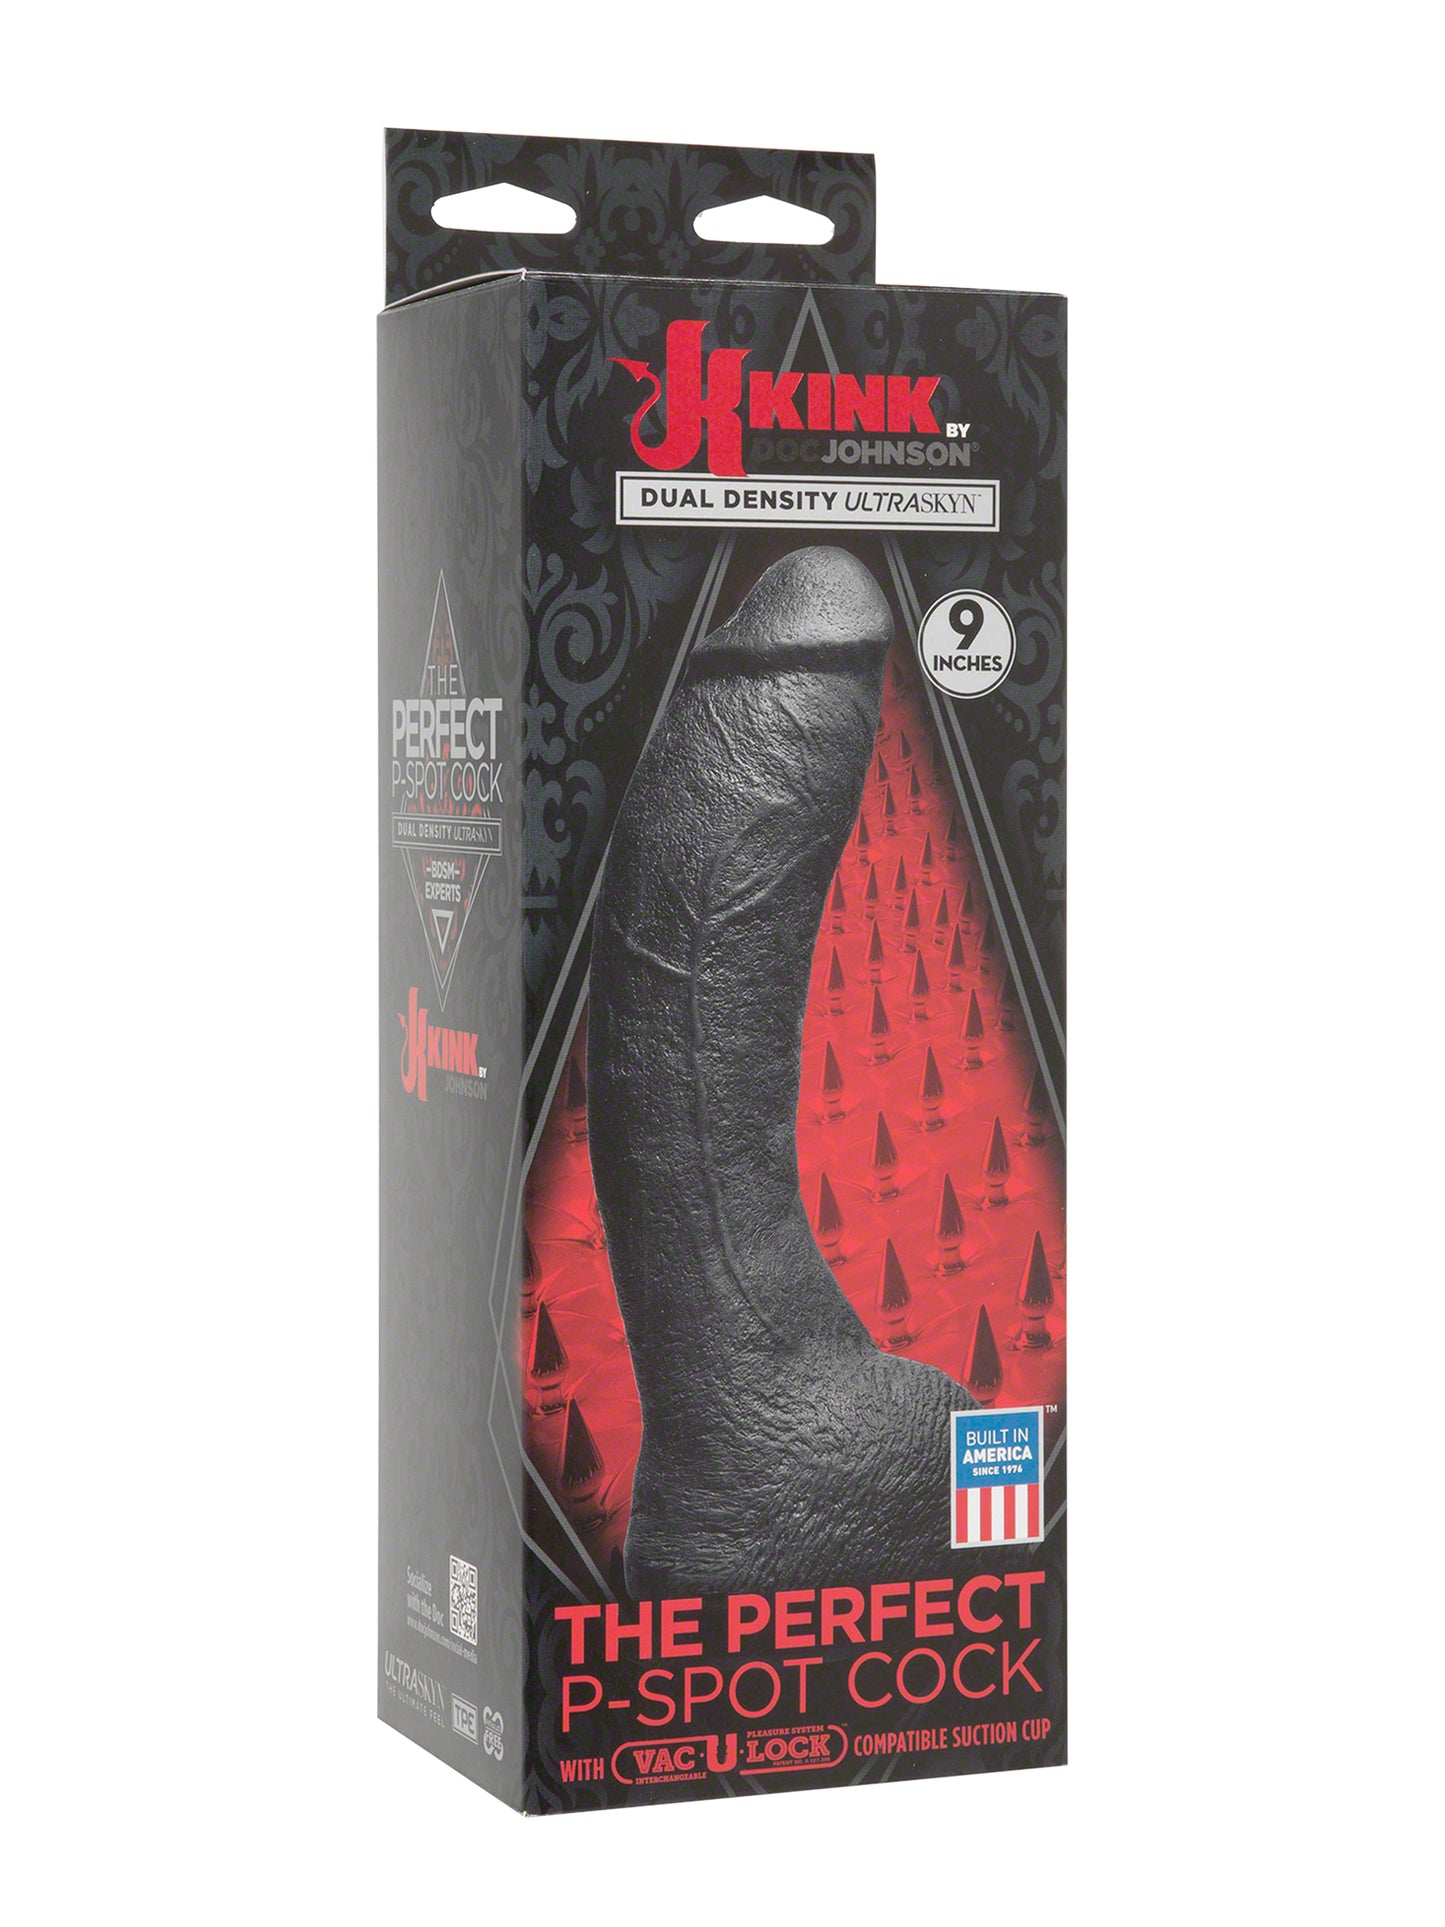 Kink - The Perfect P-Spot Cock Dual Density Realistic Curved Dildo 24,1 cm